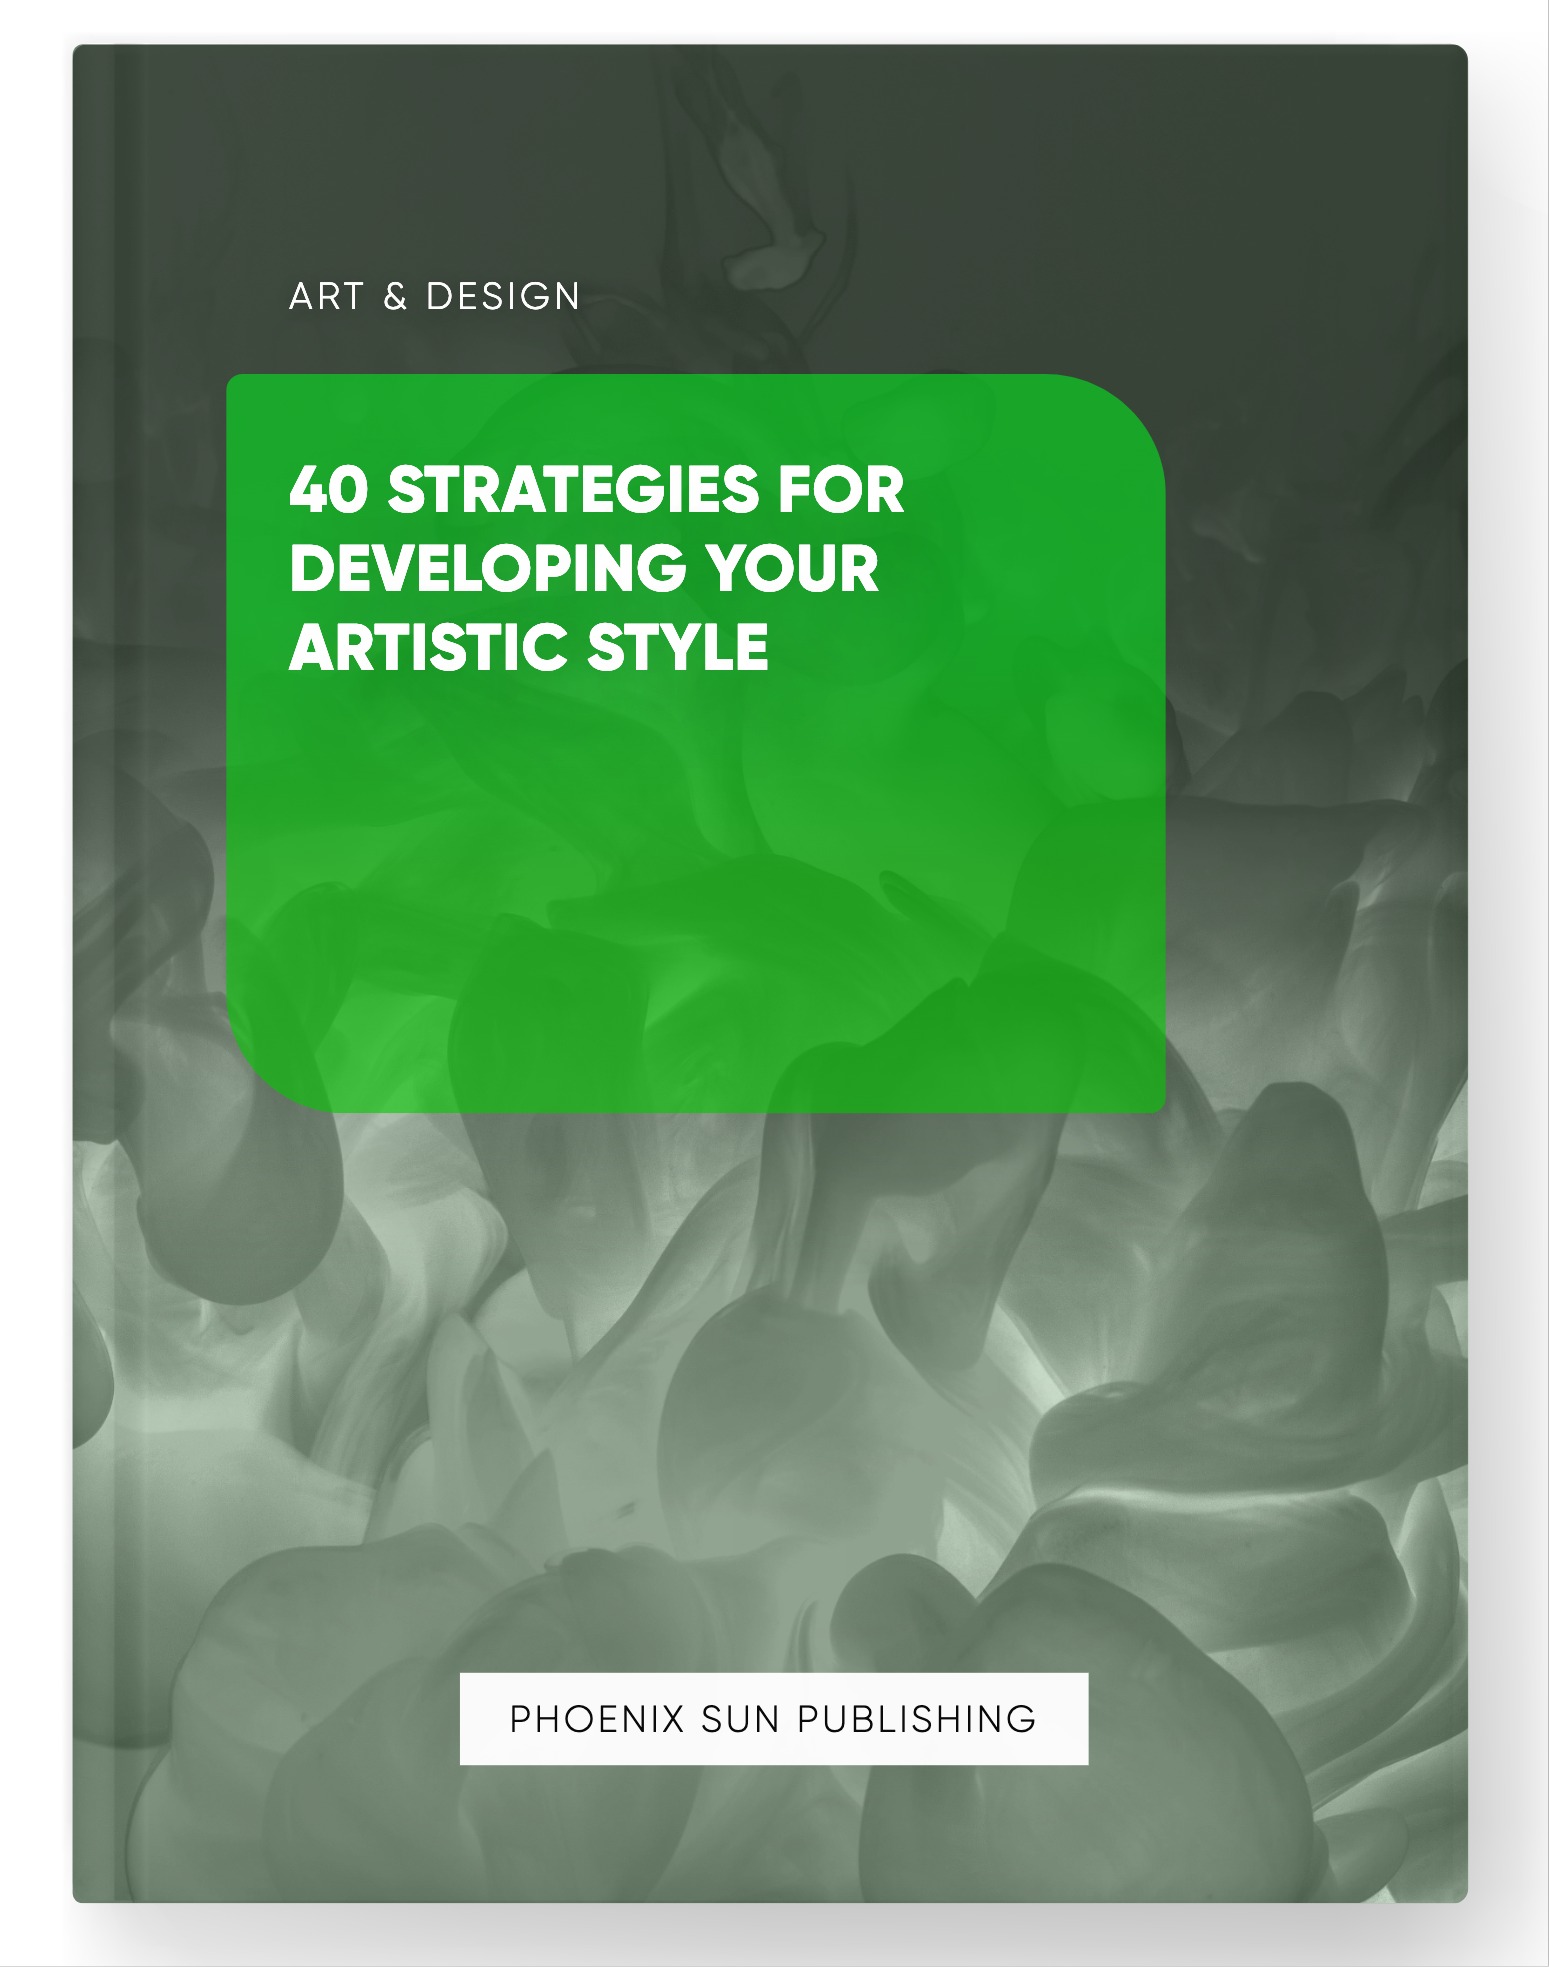 40 Strategies for Developing your Artistic Style